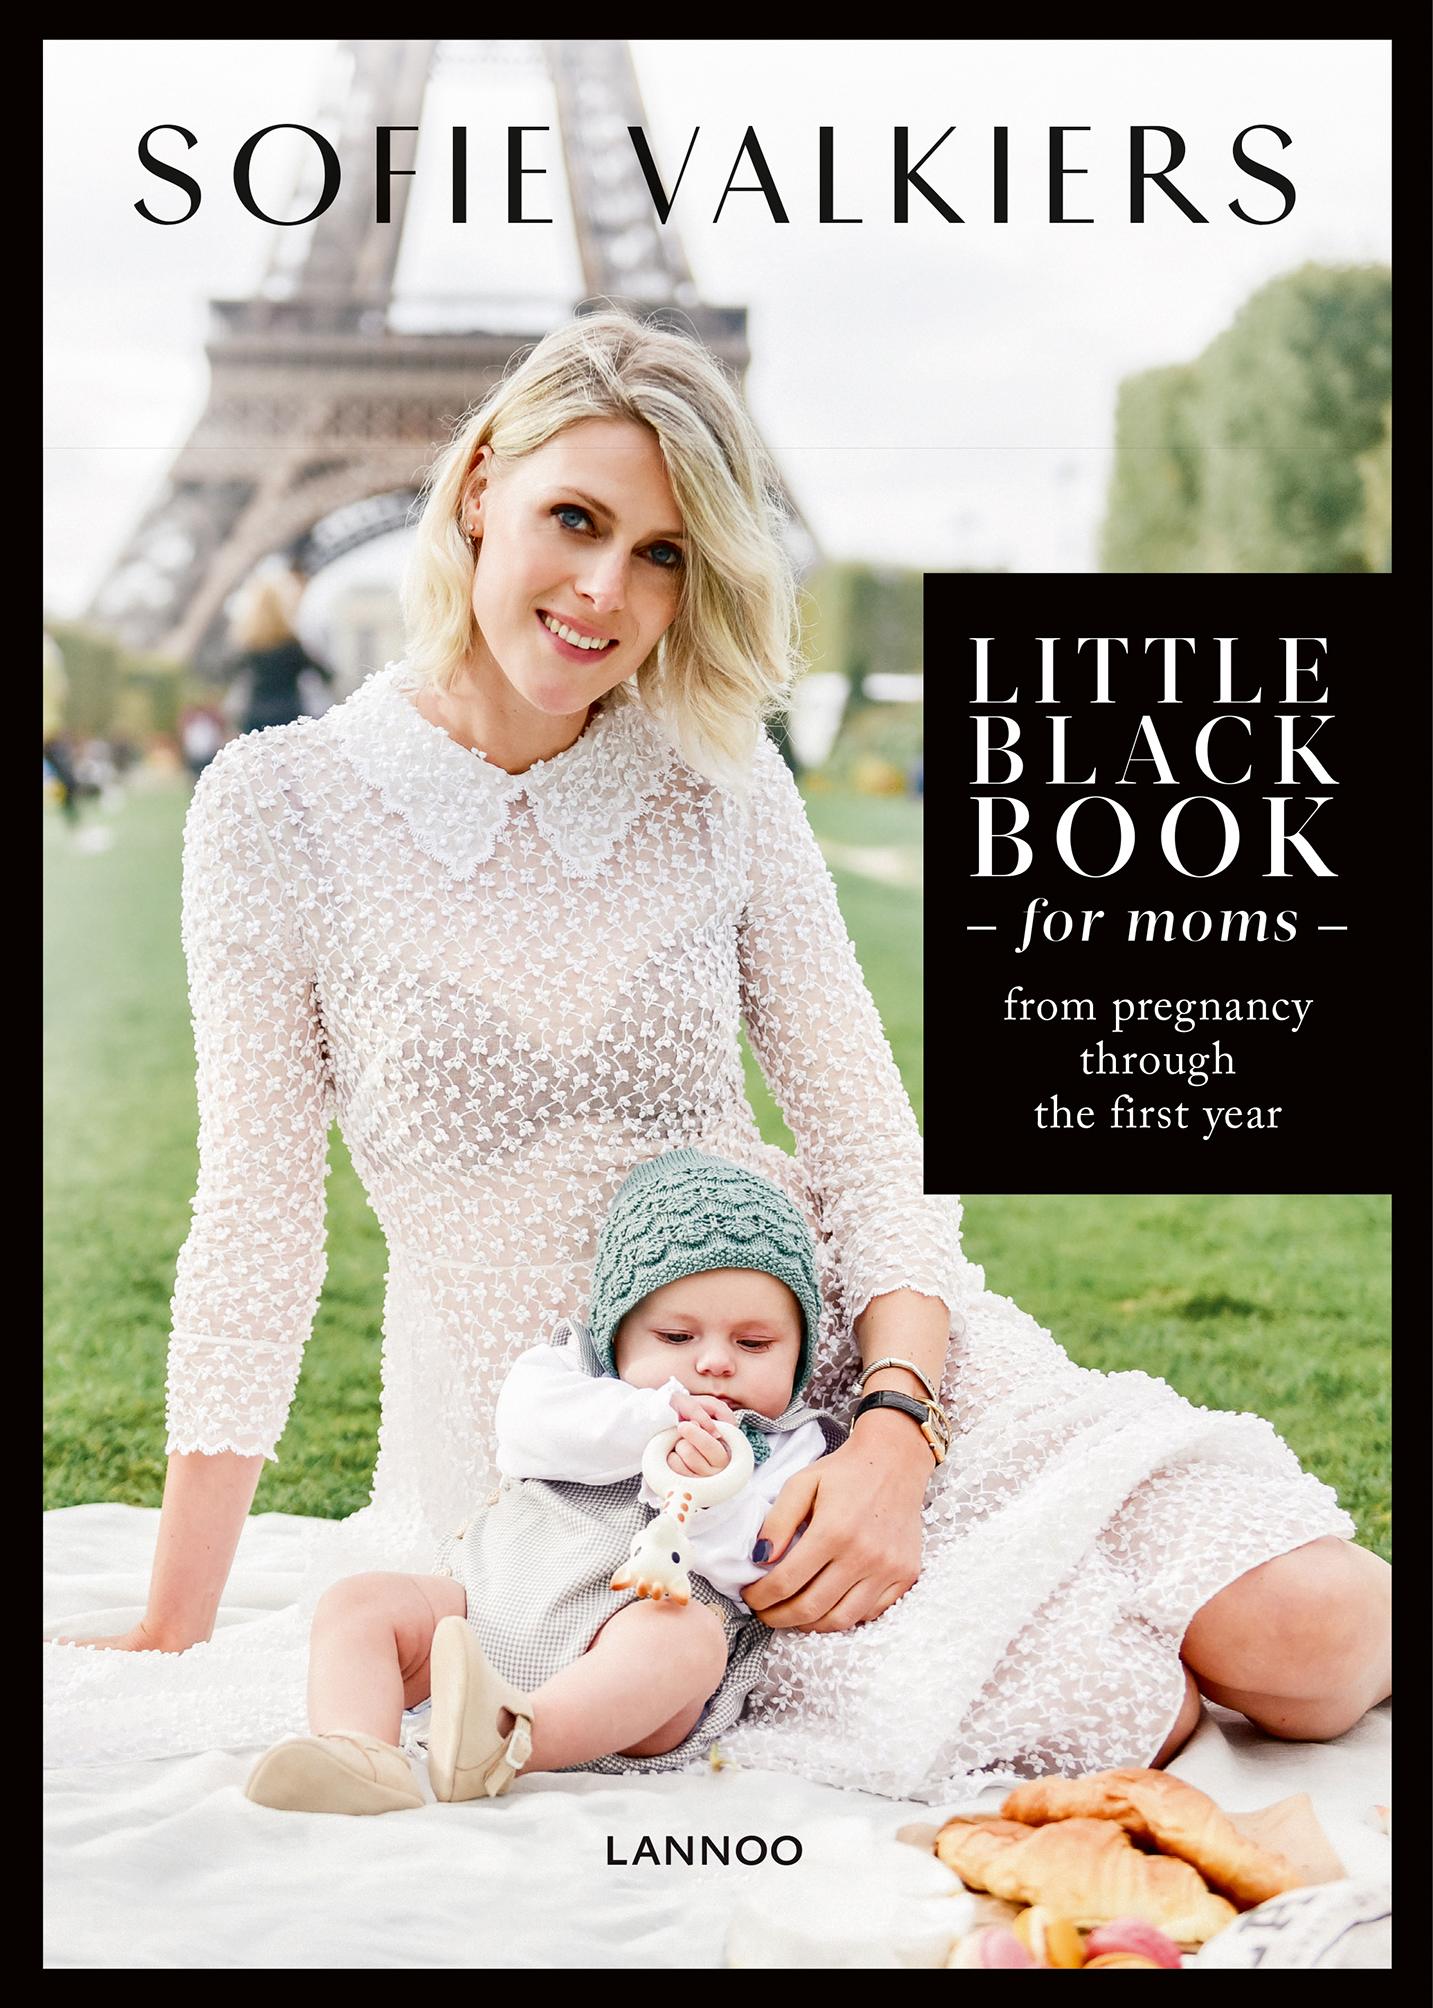 Little Black Book (for moms) - Sofie Valkiers - 19WA0142